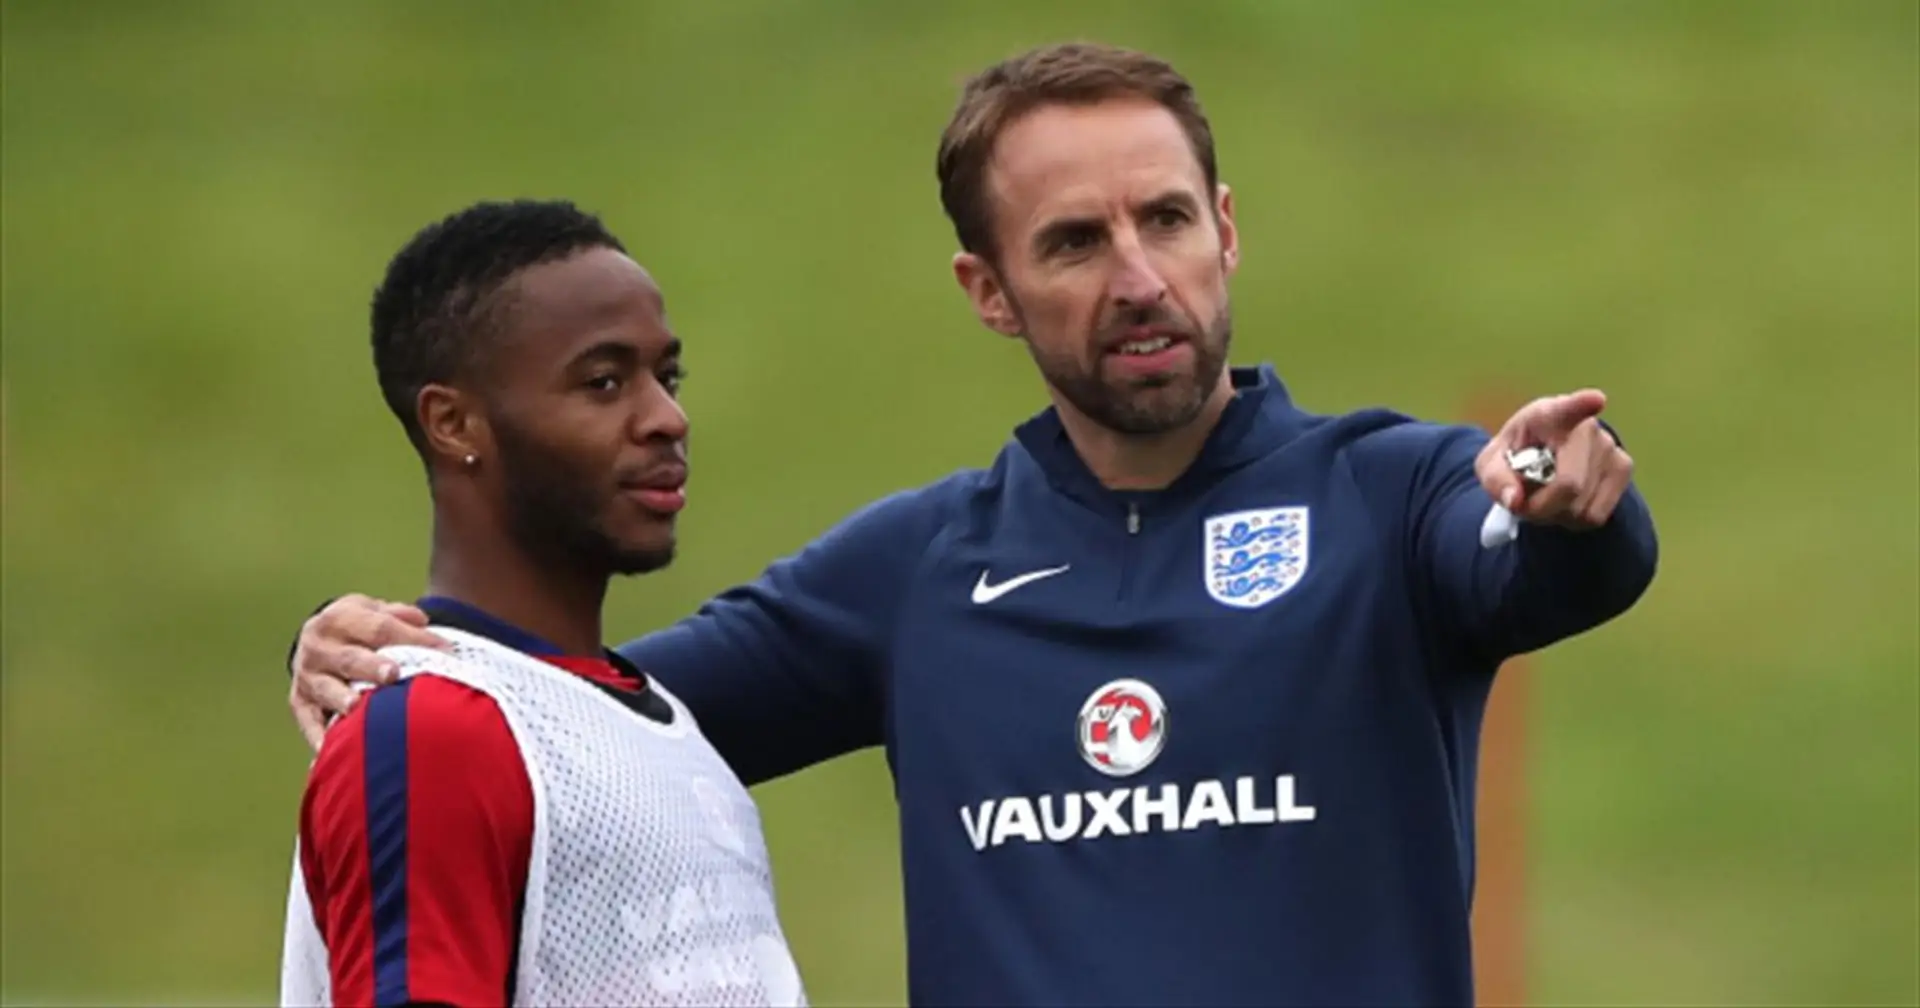 'He's suffered by being in a team that's misfiring': Gareth Southgate told to include Sterling in England squad